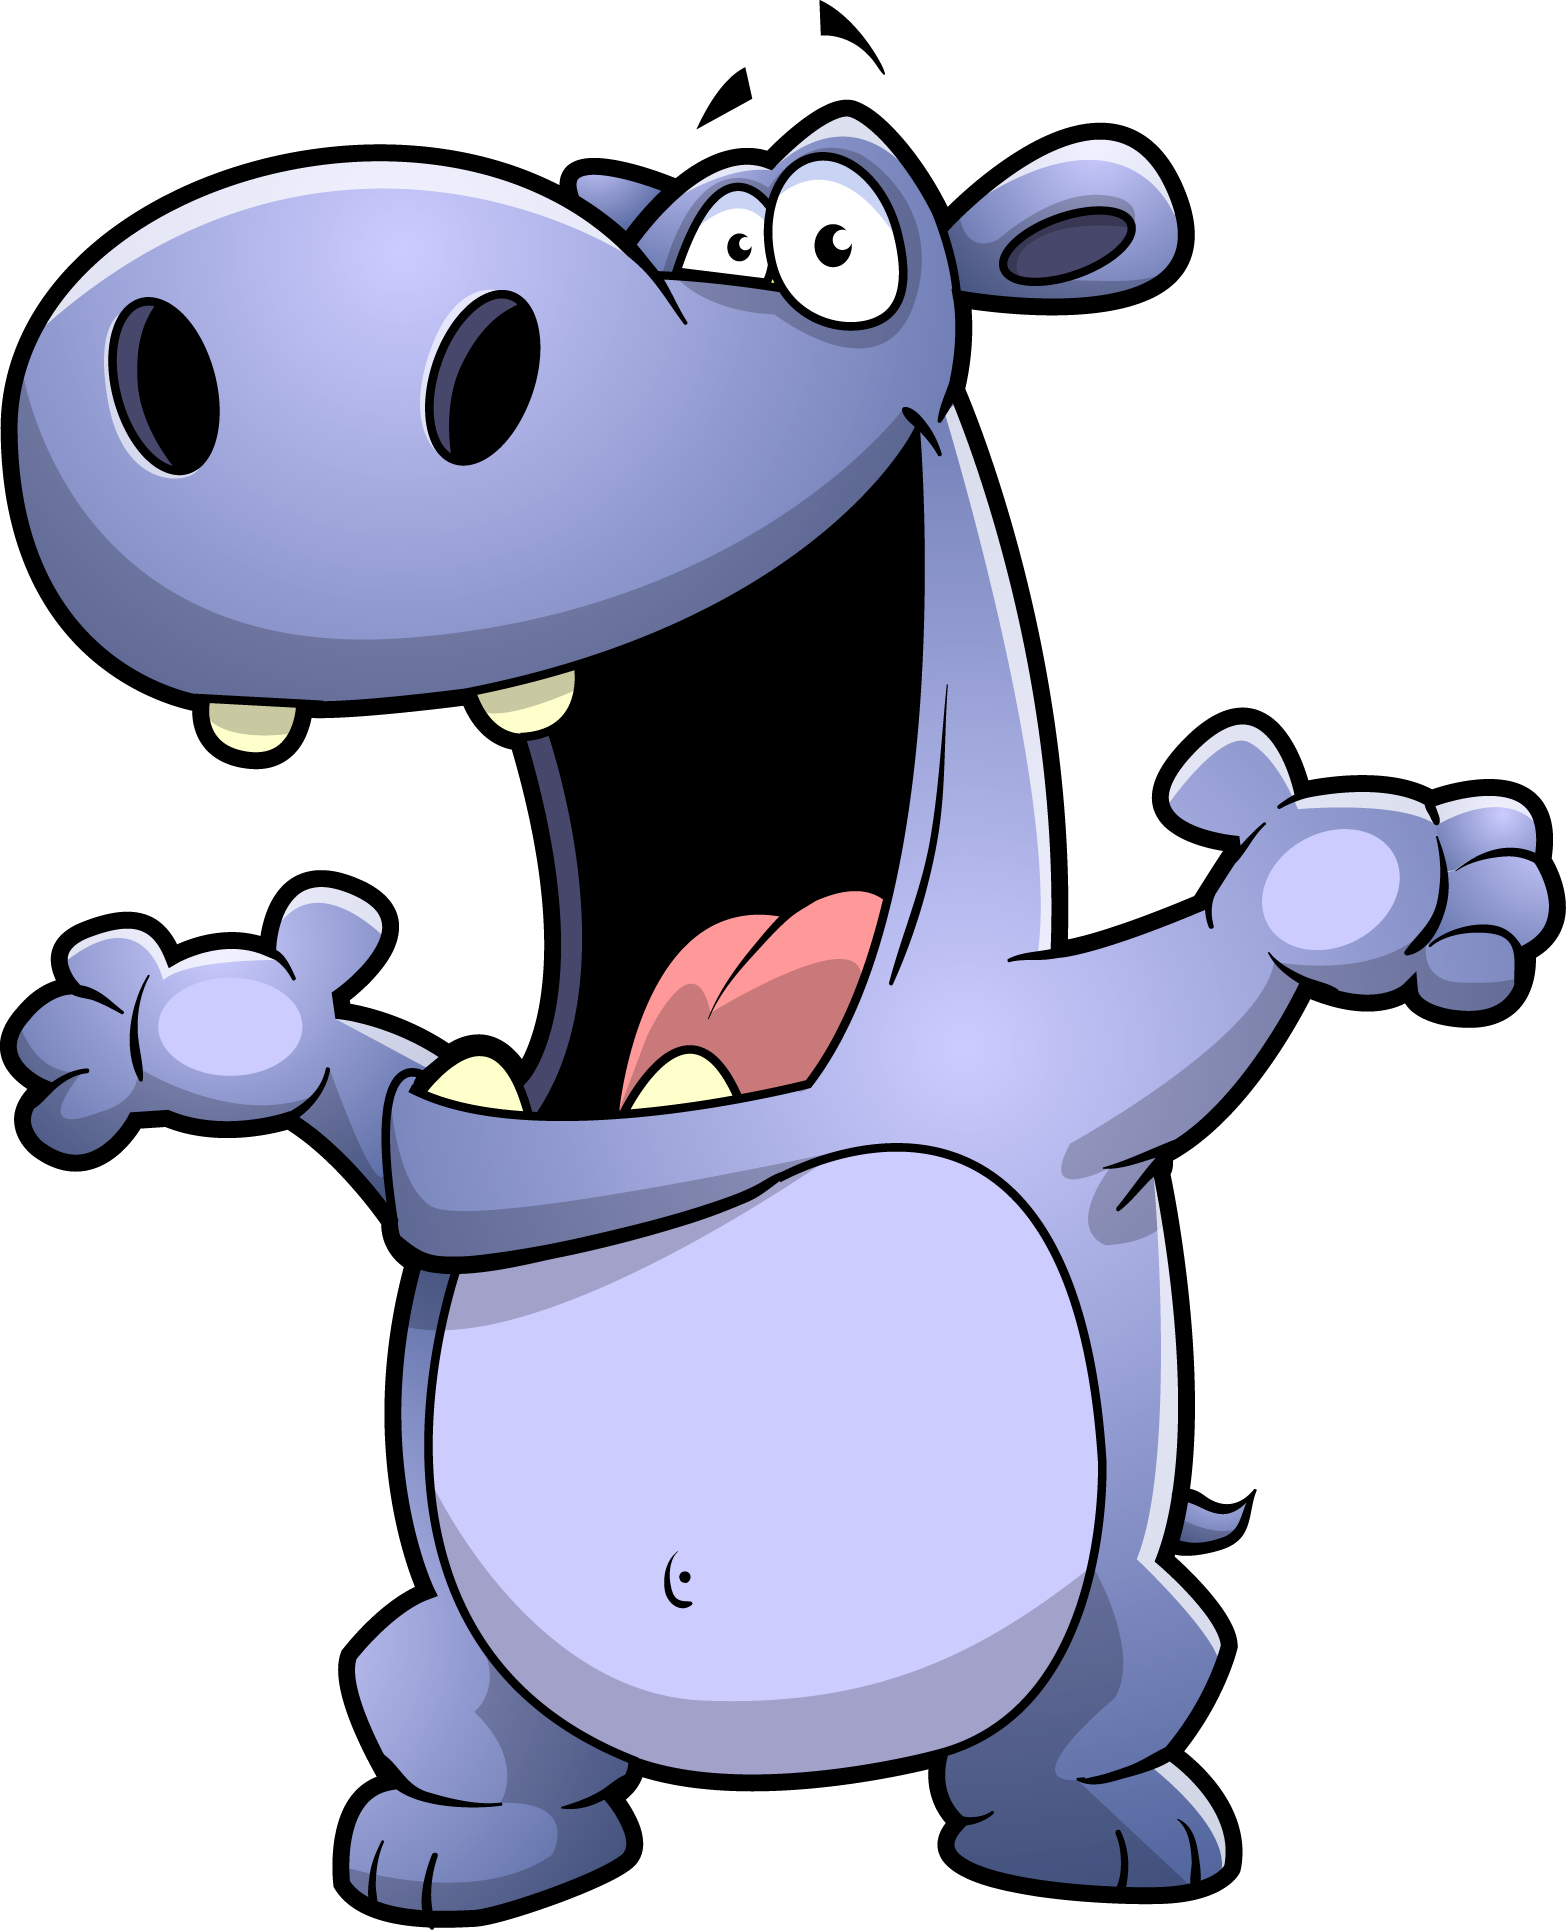 Hugo Is A Young And Adventurous Hipoppotamus Who Lives - Excited Hippo (1566x1930)